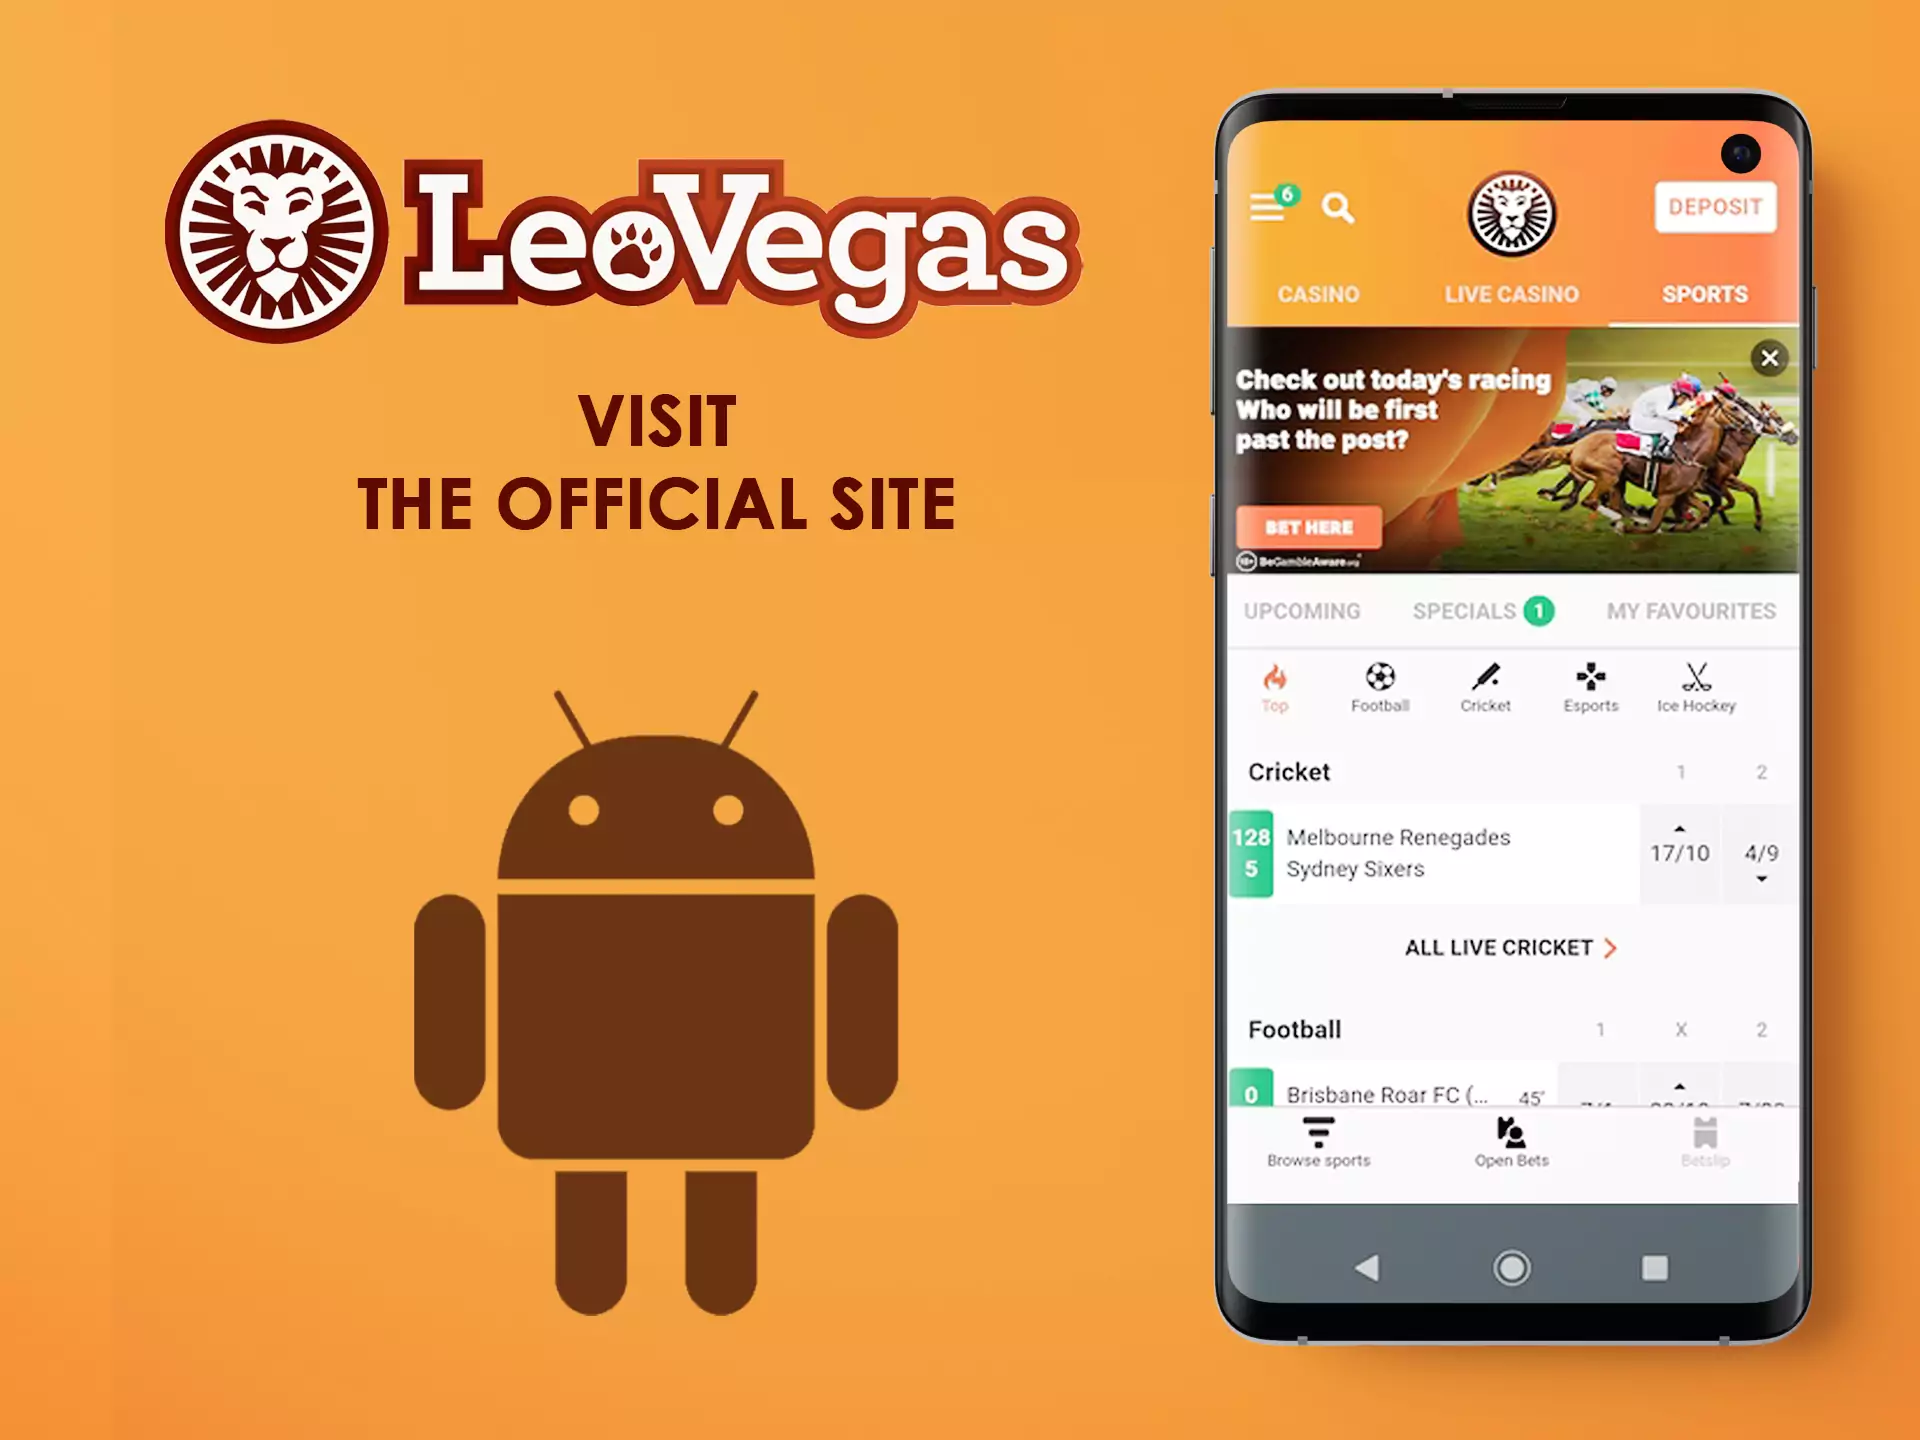 Open the official page of LeoVegas.